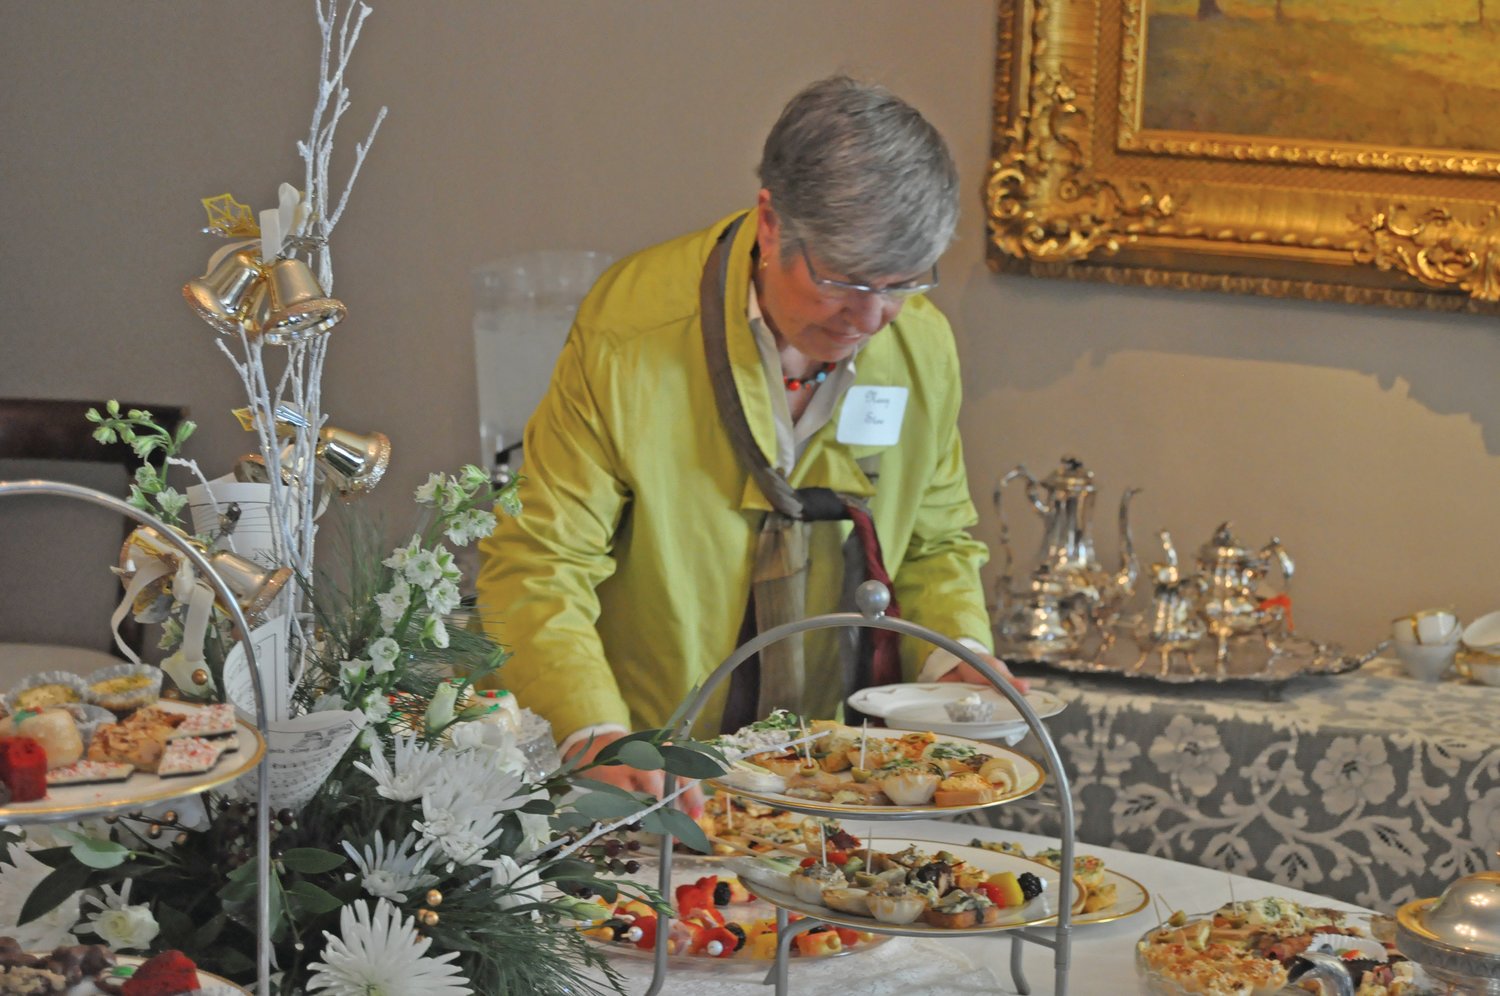 Nancy Stone selects a refreshment at the Sounds of the Season Holiday Tea & Fashion Show at the Elston Homestead Friday. The fundraiser for the General Lew Wallace Study & Museum featured an interactive fashion show featuring local models wearing fashions from heathcliff.